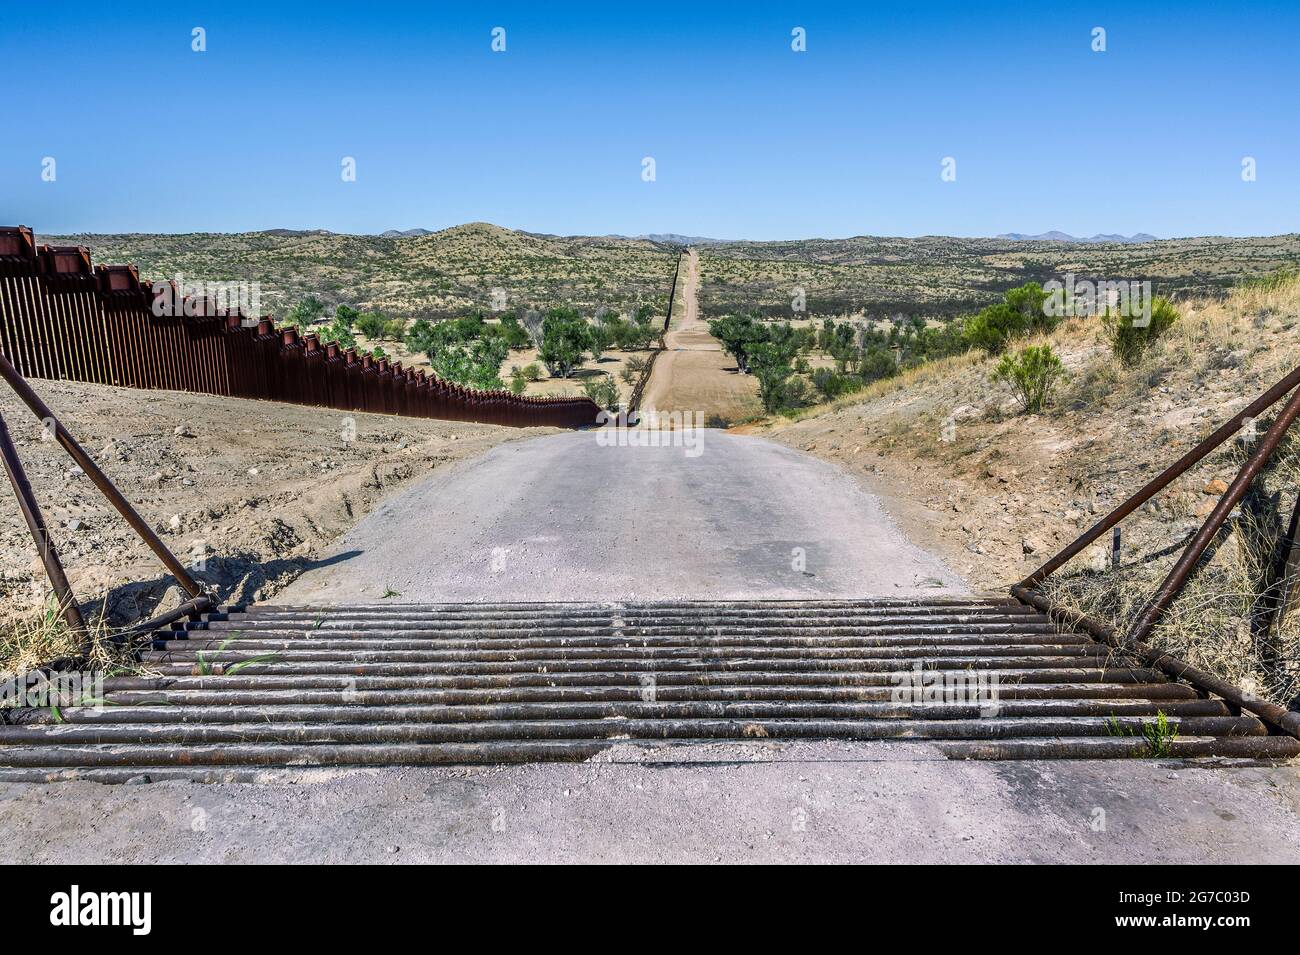 Cattle guard beside US border fence on the Mexico border, east of Nogales Arizona USA, and Nogales Sonora Mexico, viewed from US side. This type of ba Stock Photo